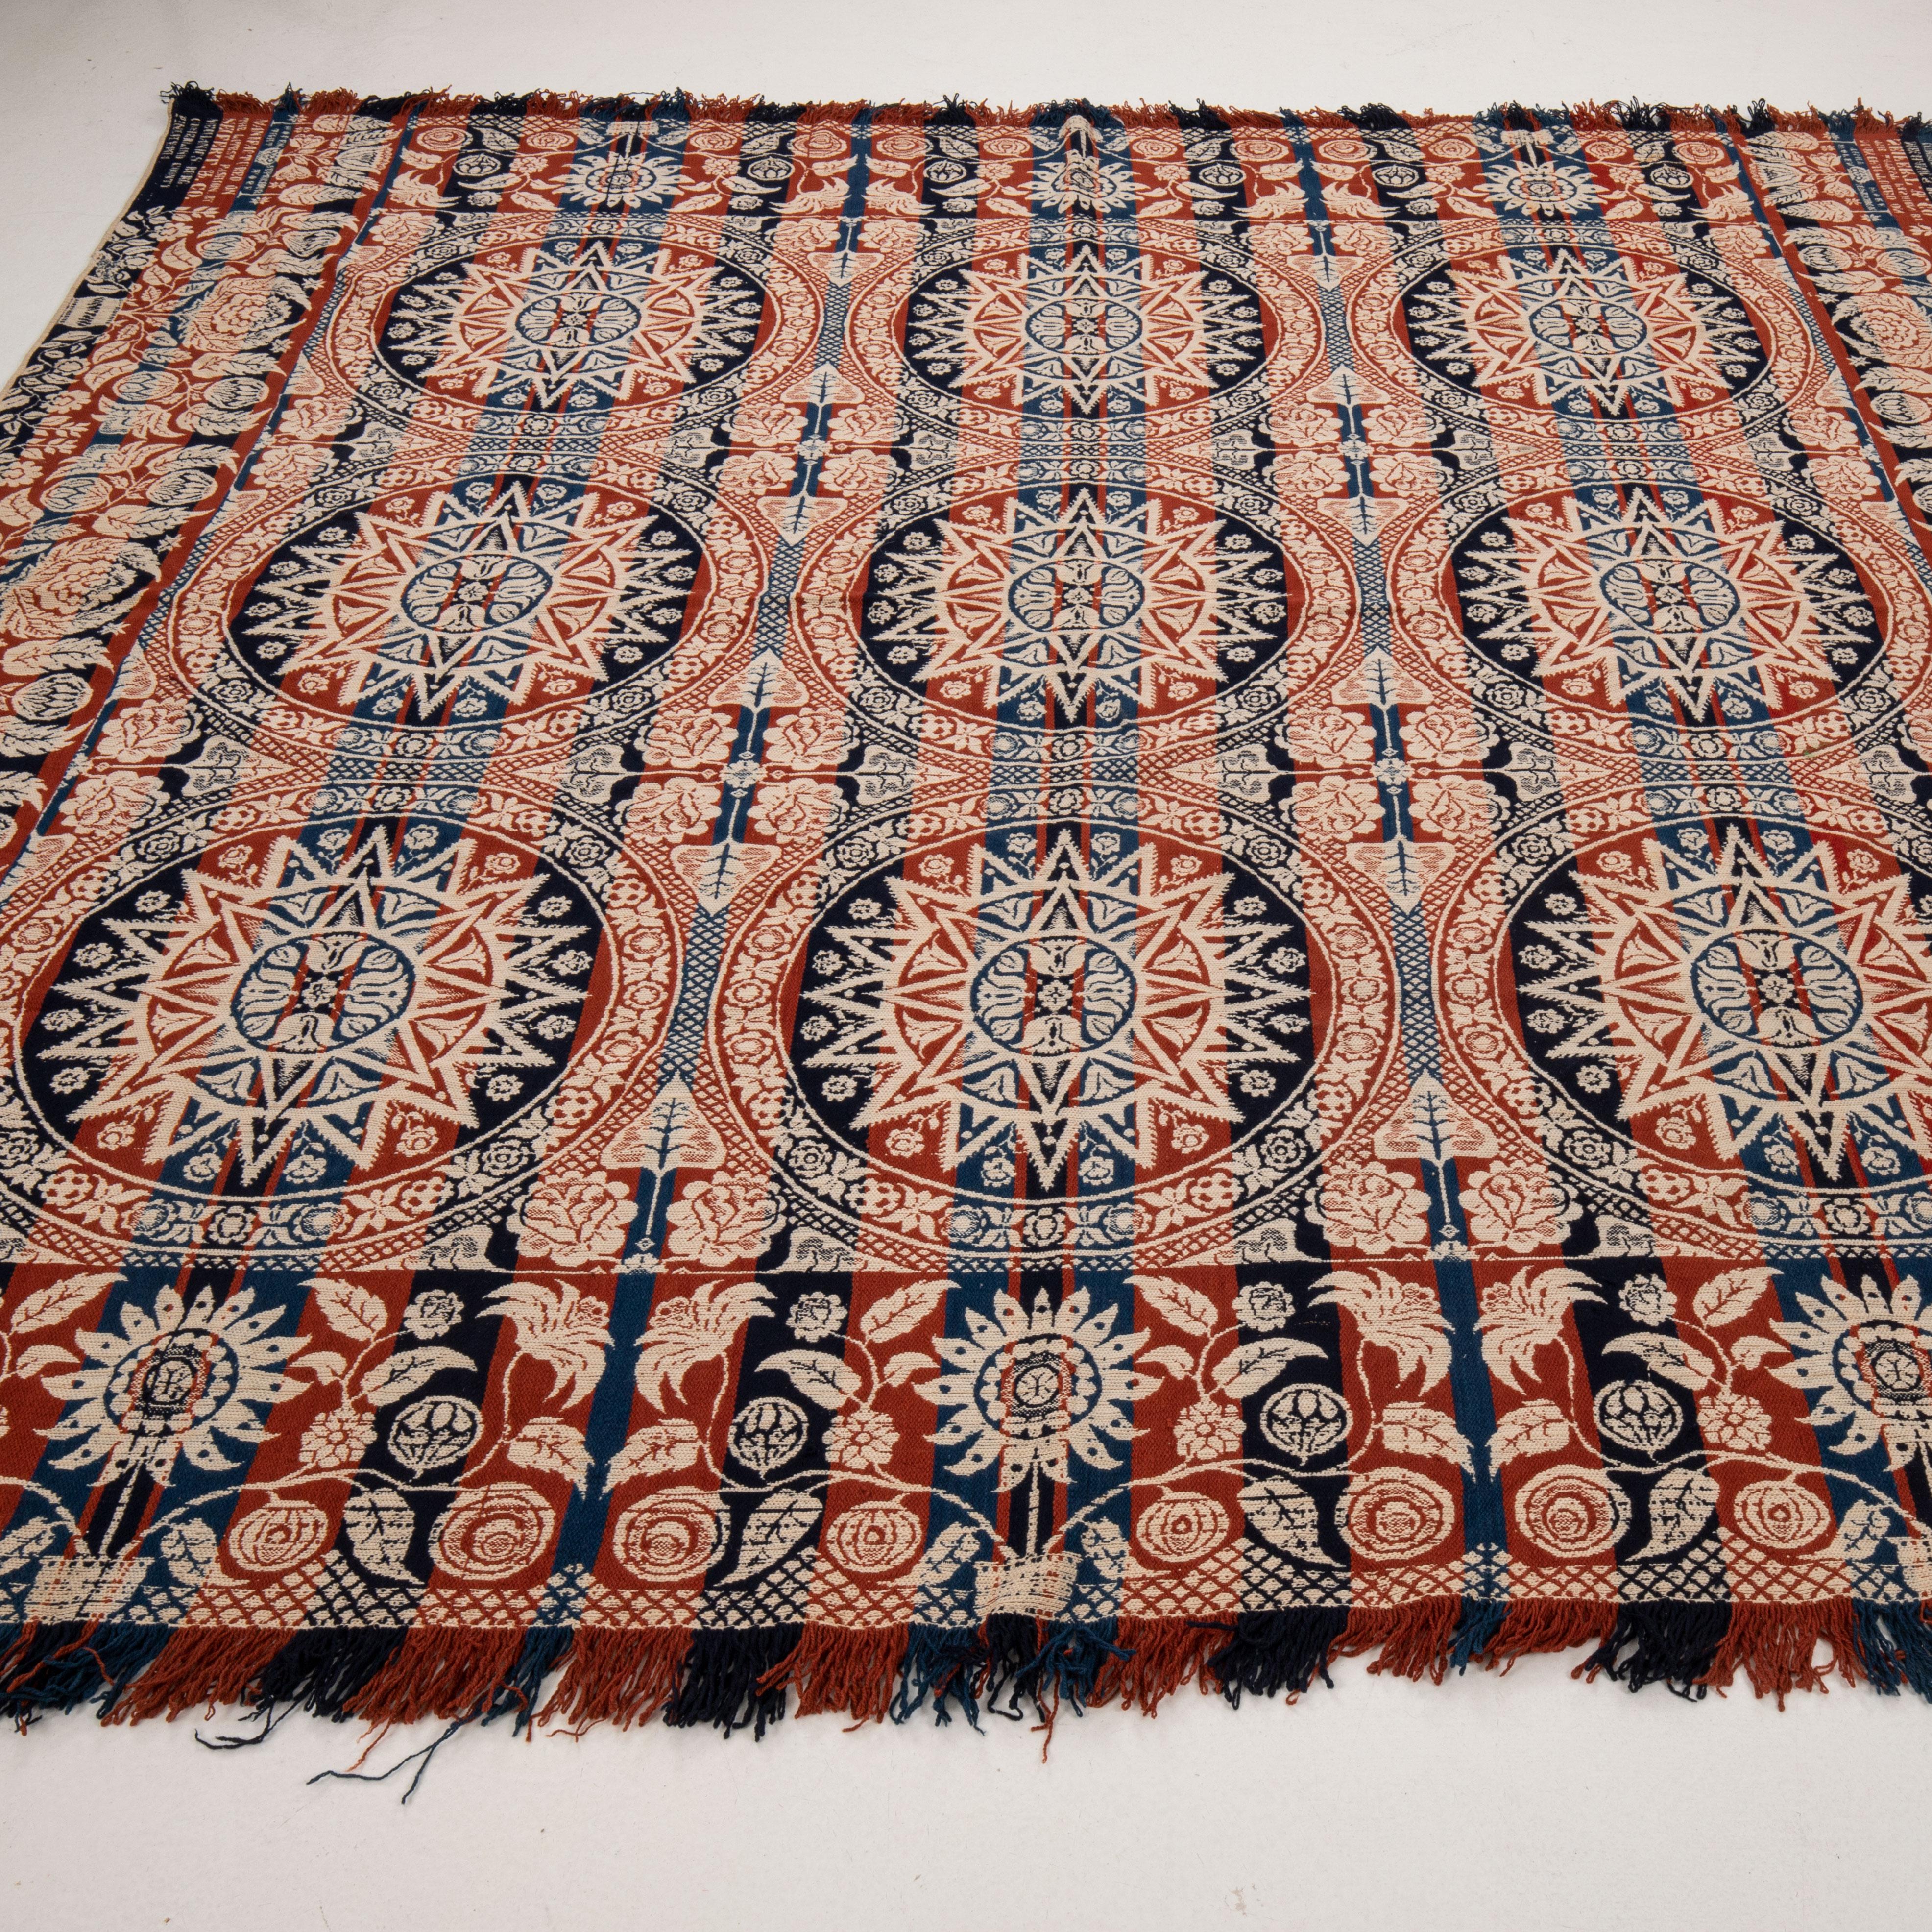 19th Century Jacquard Woven American Coverlet 19th C. For Sale